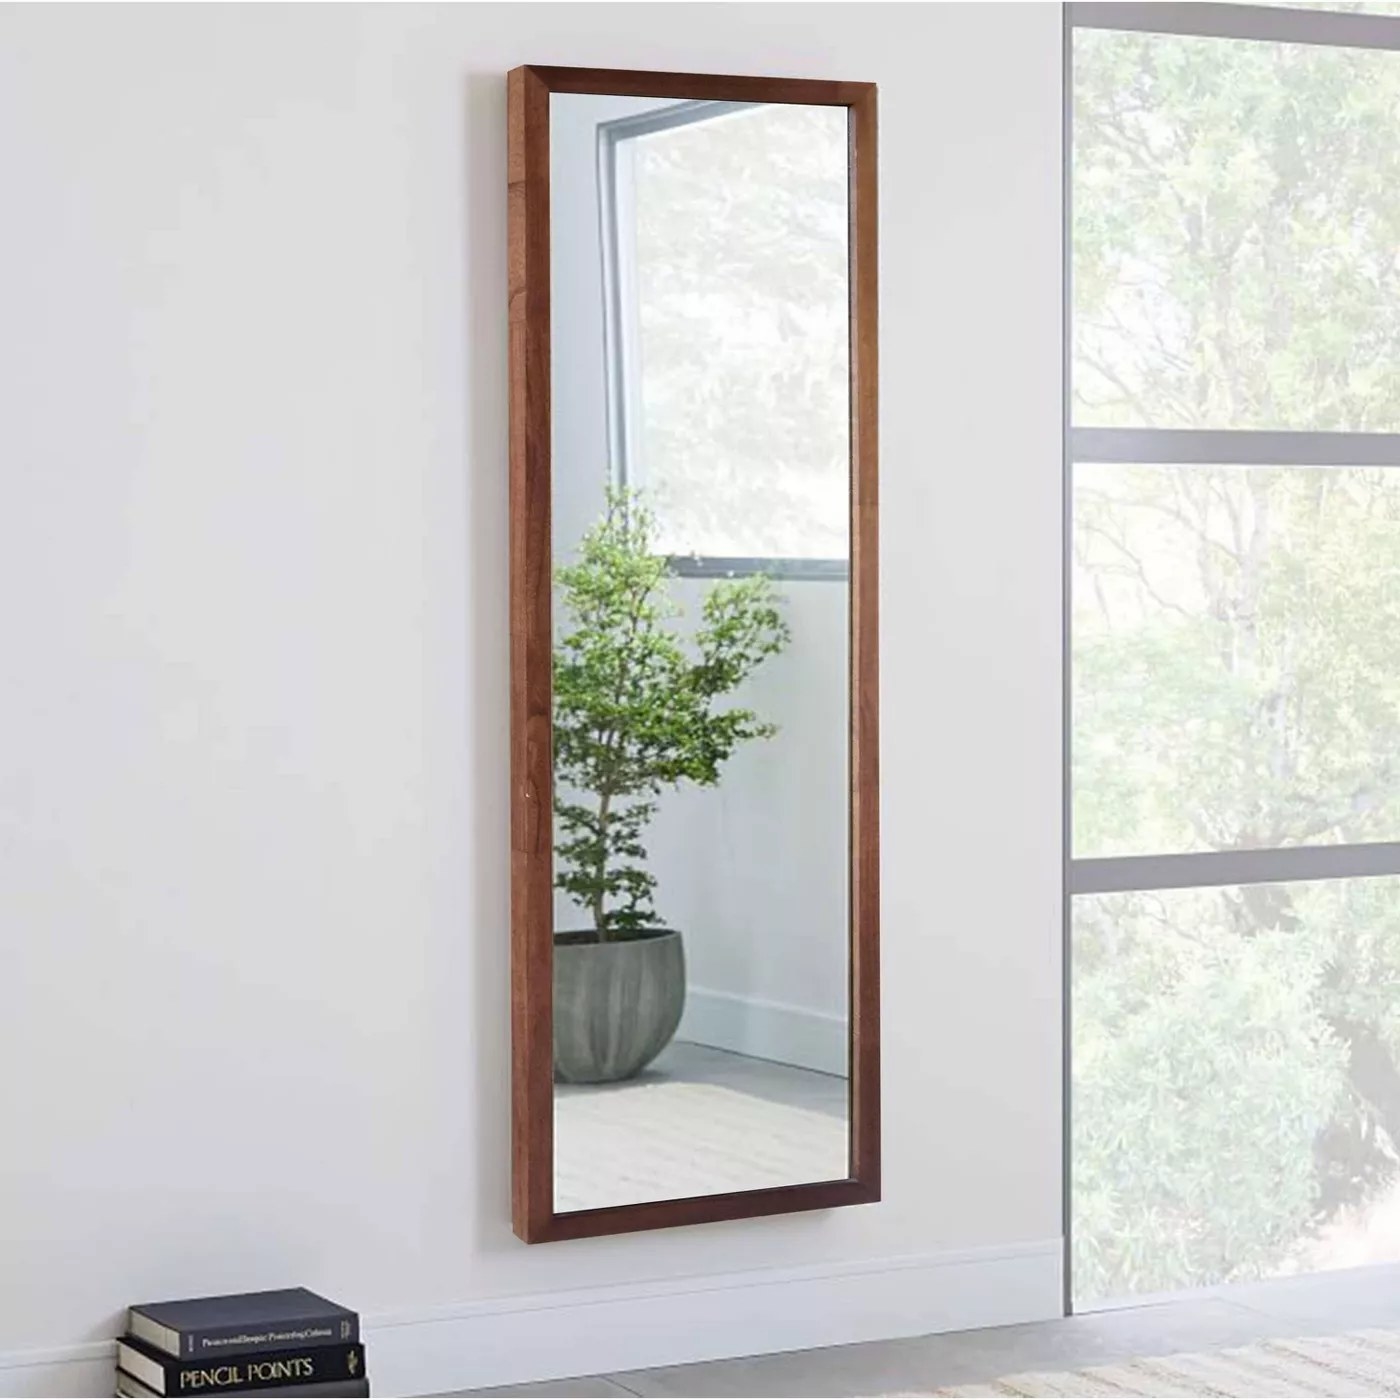 The mirror with a wooden frame hanging on a wall